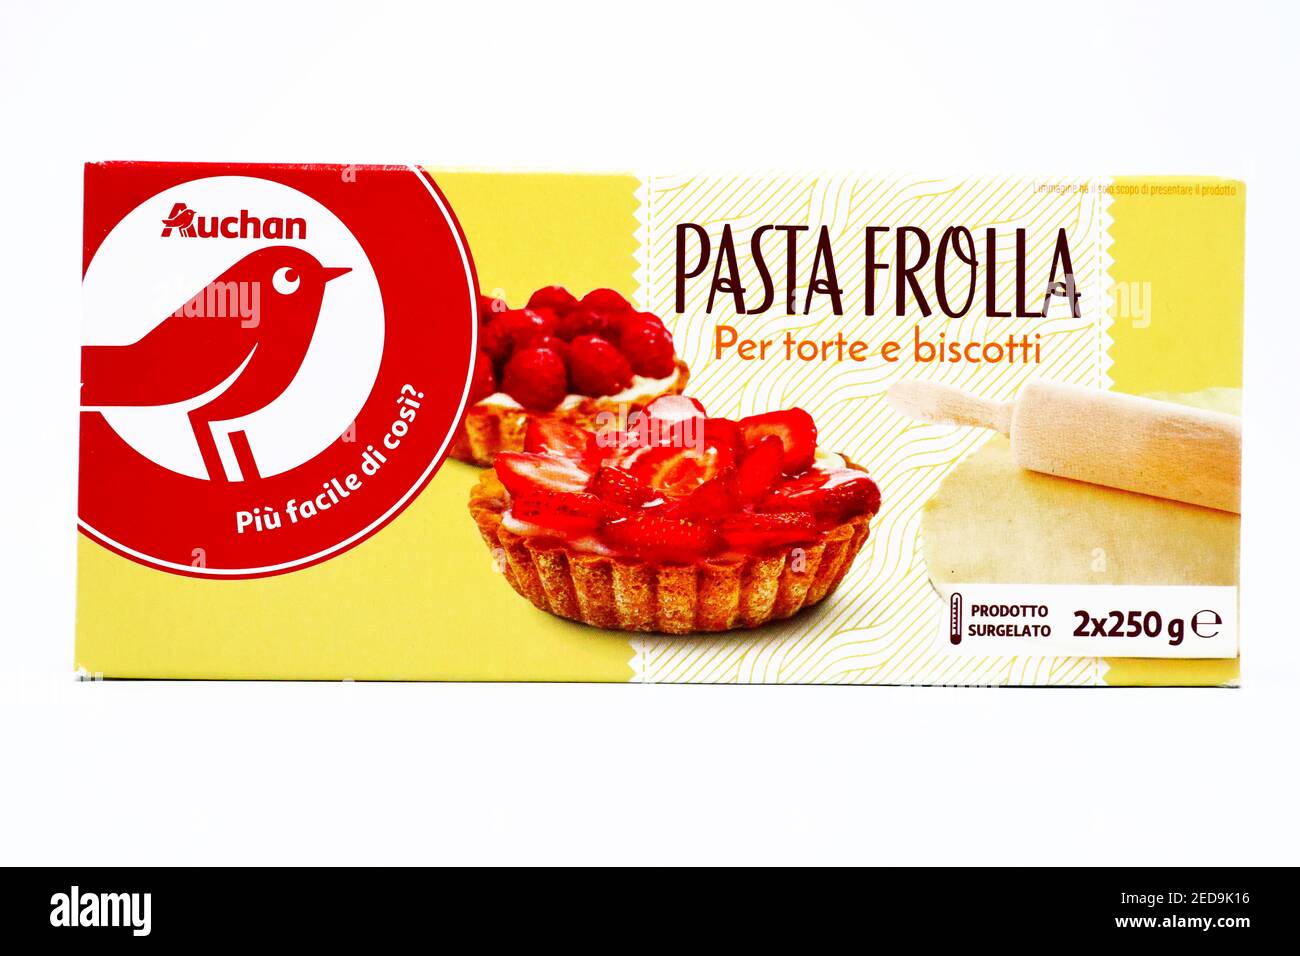 Shortcrust pastry for Cakes and Cookies sold by Auchan Supermarket chain Stock Photo